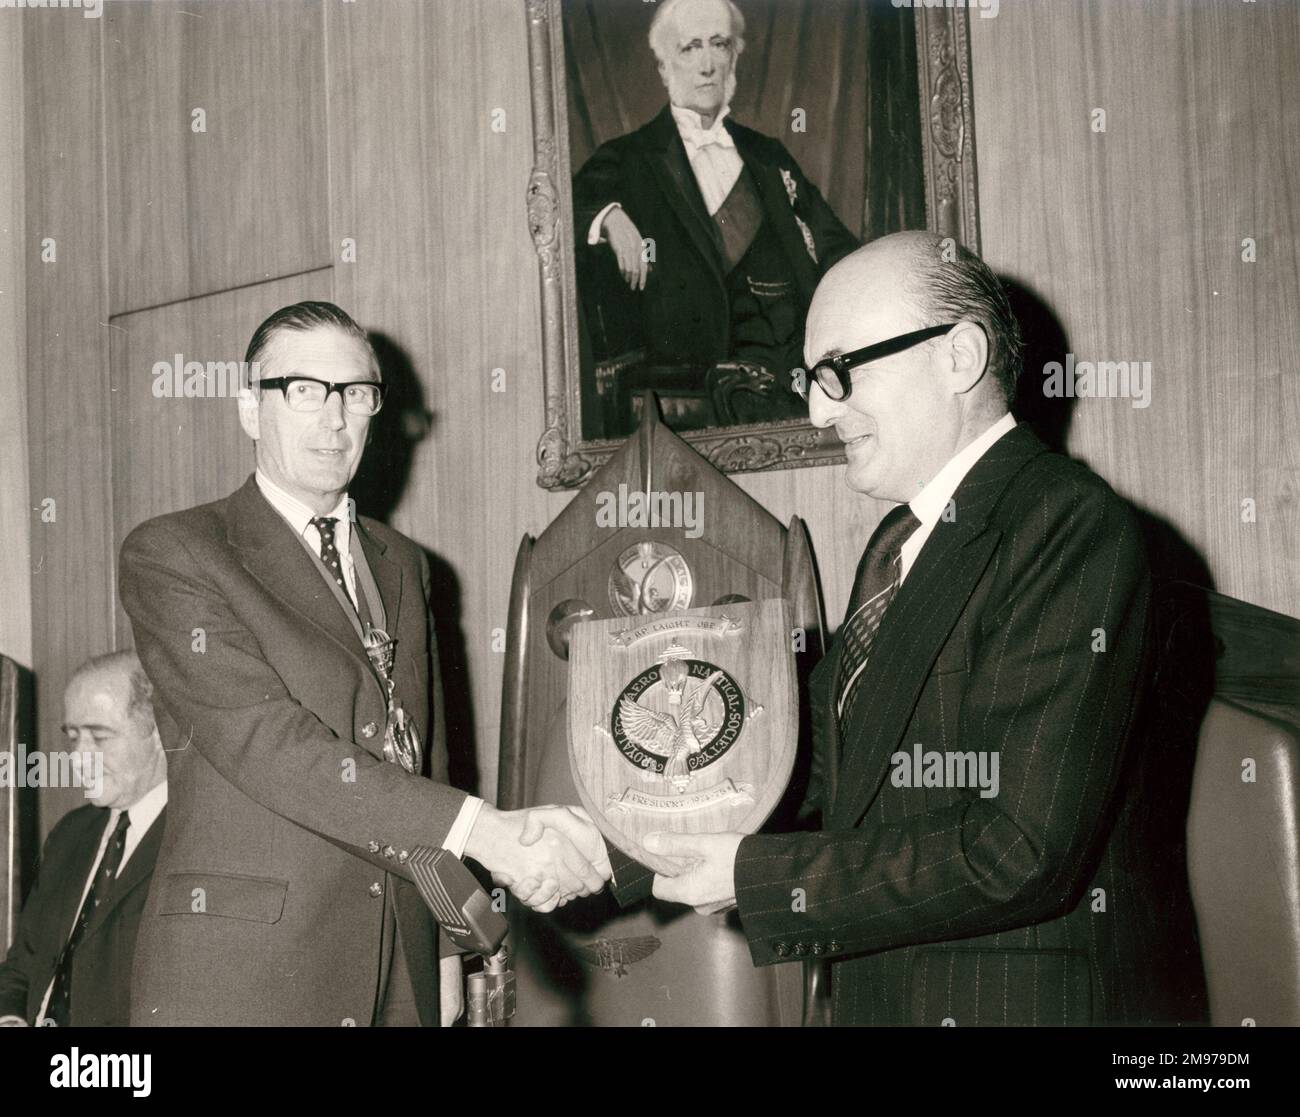 B.P. Laight, OBE, CEng, MIMechE, FRAeS, RAeS President 1974-1975, right, receives a Society shield from the new President, AM Sir Charles Pringle, KBE, MA, CEng, FRAeS, RAeS President 1975-1976, on 15 May 1975. Stock Photo